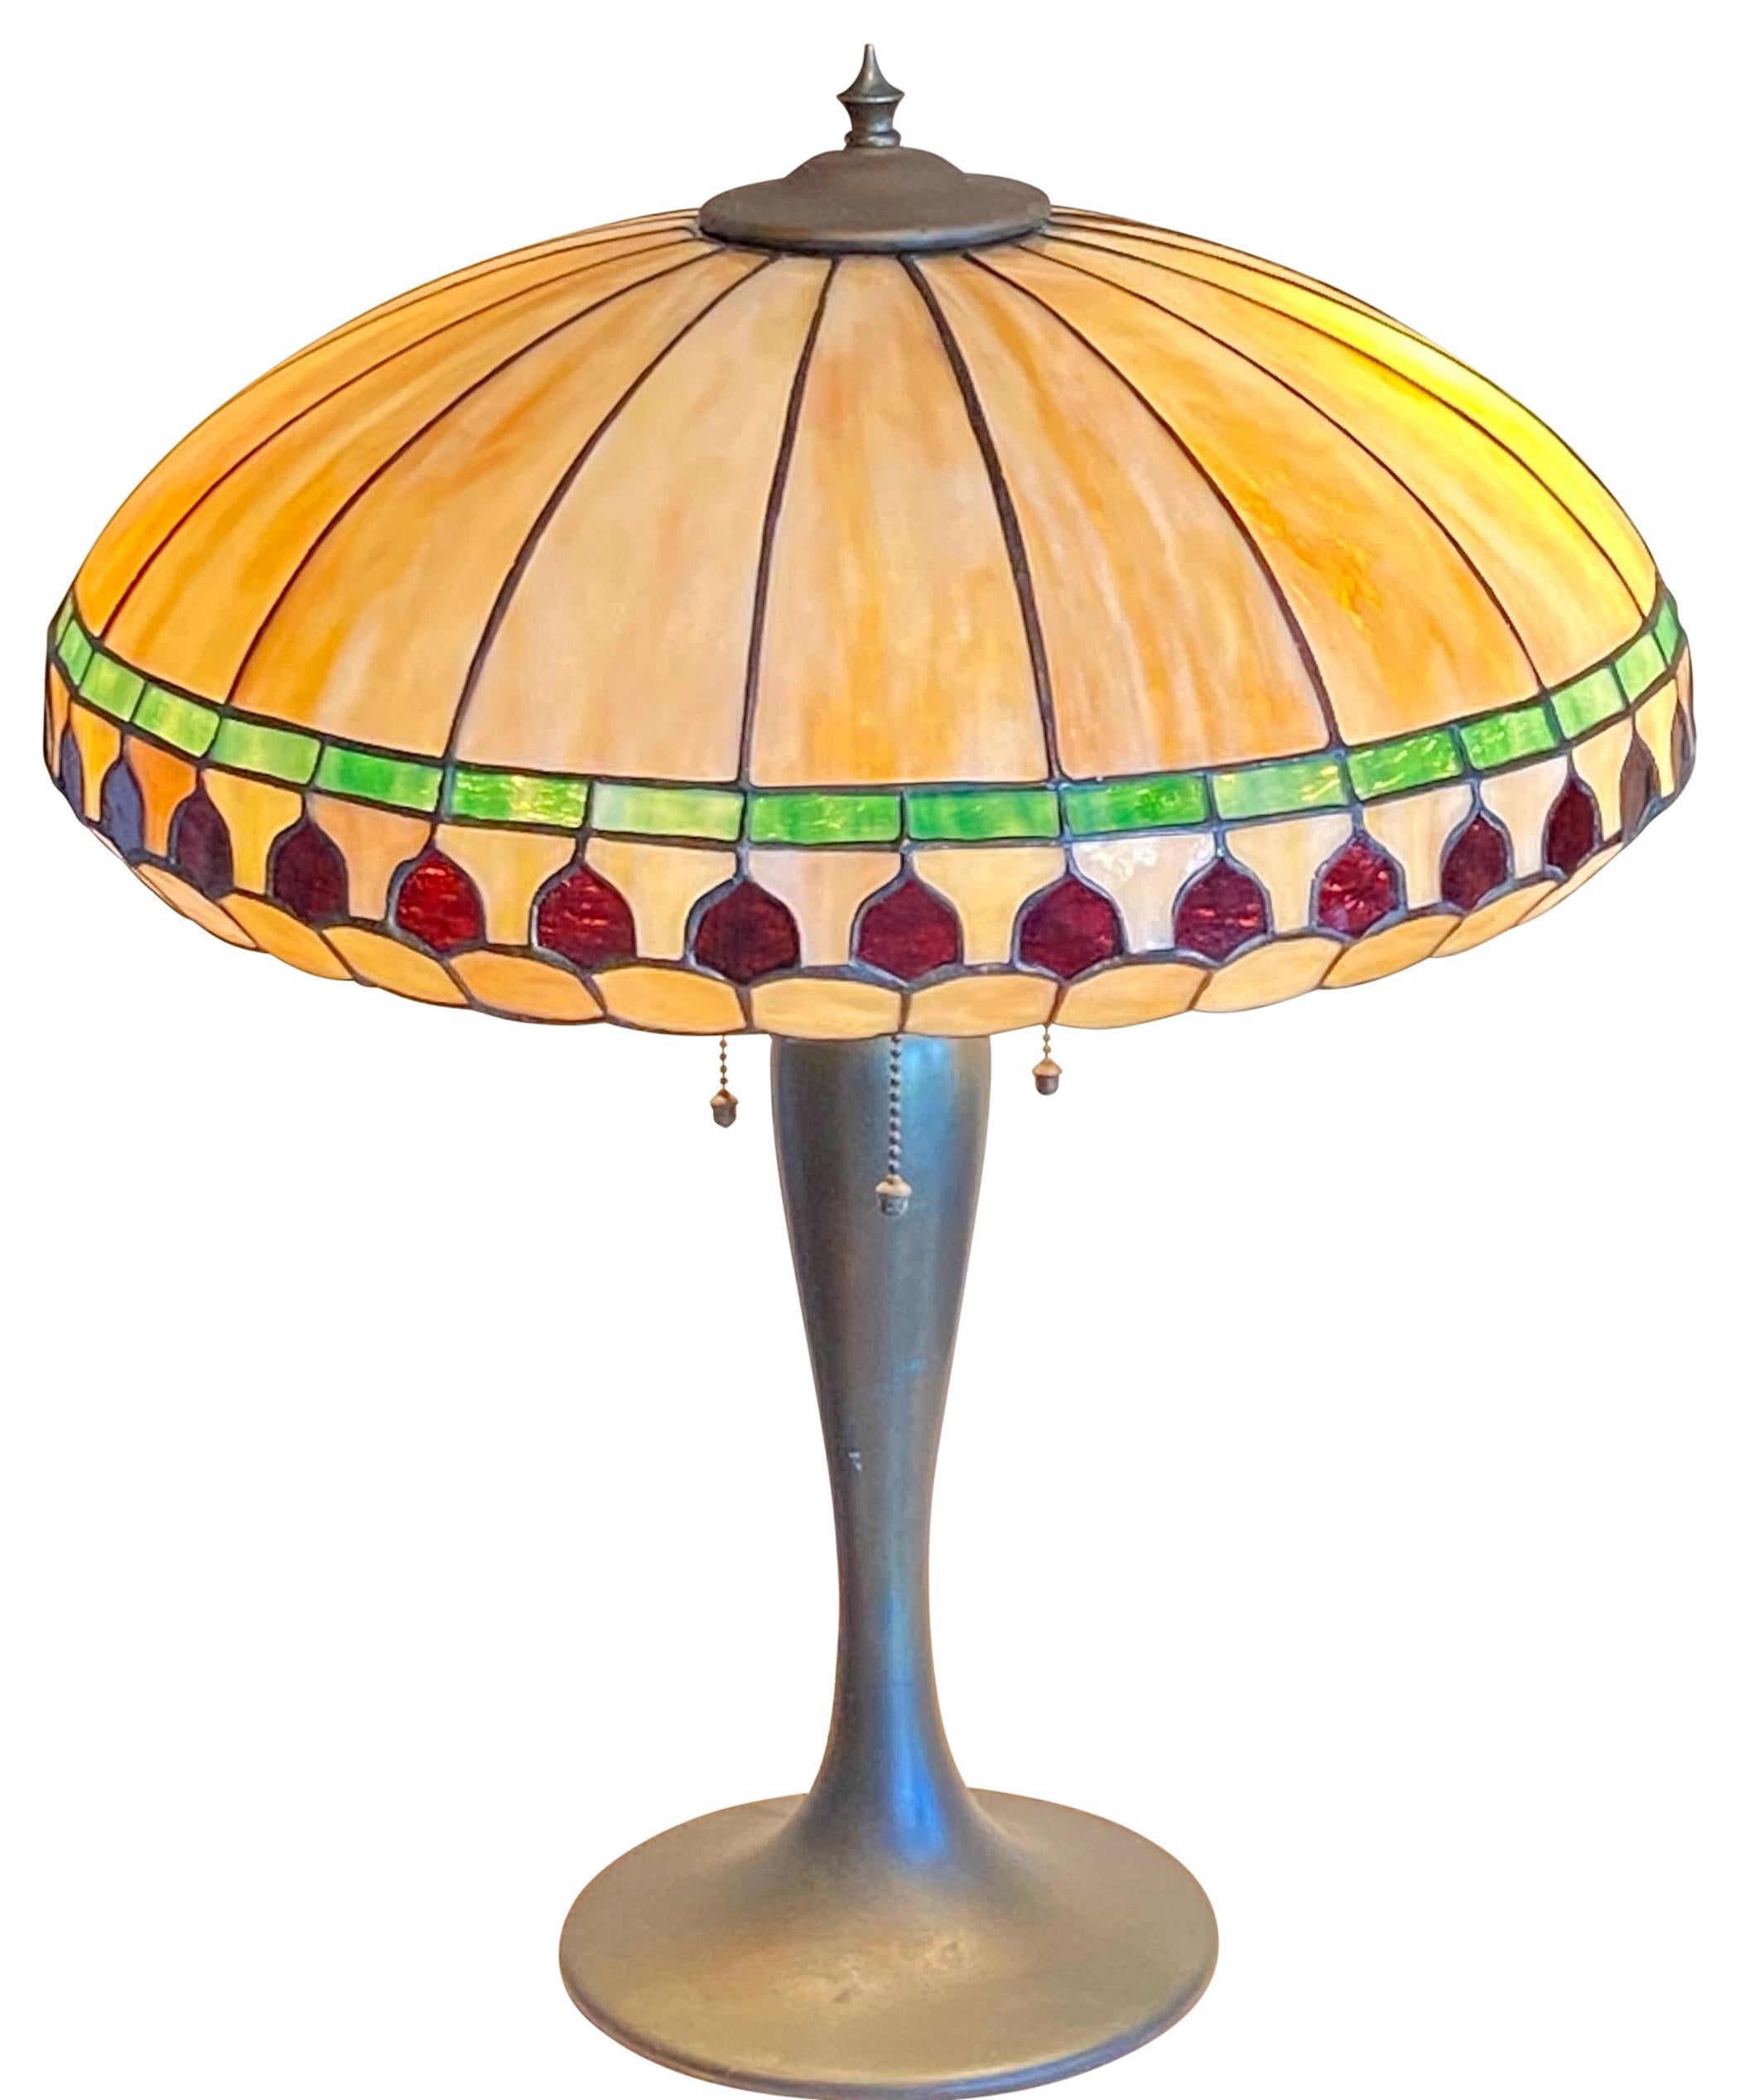 Early 20th Century American Arts and Crafts Era Leaded Table Lamp In Good Condition For Sale In San Francisco, CA